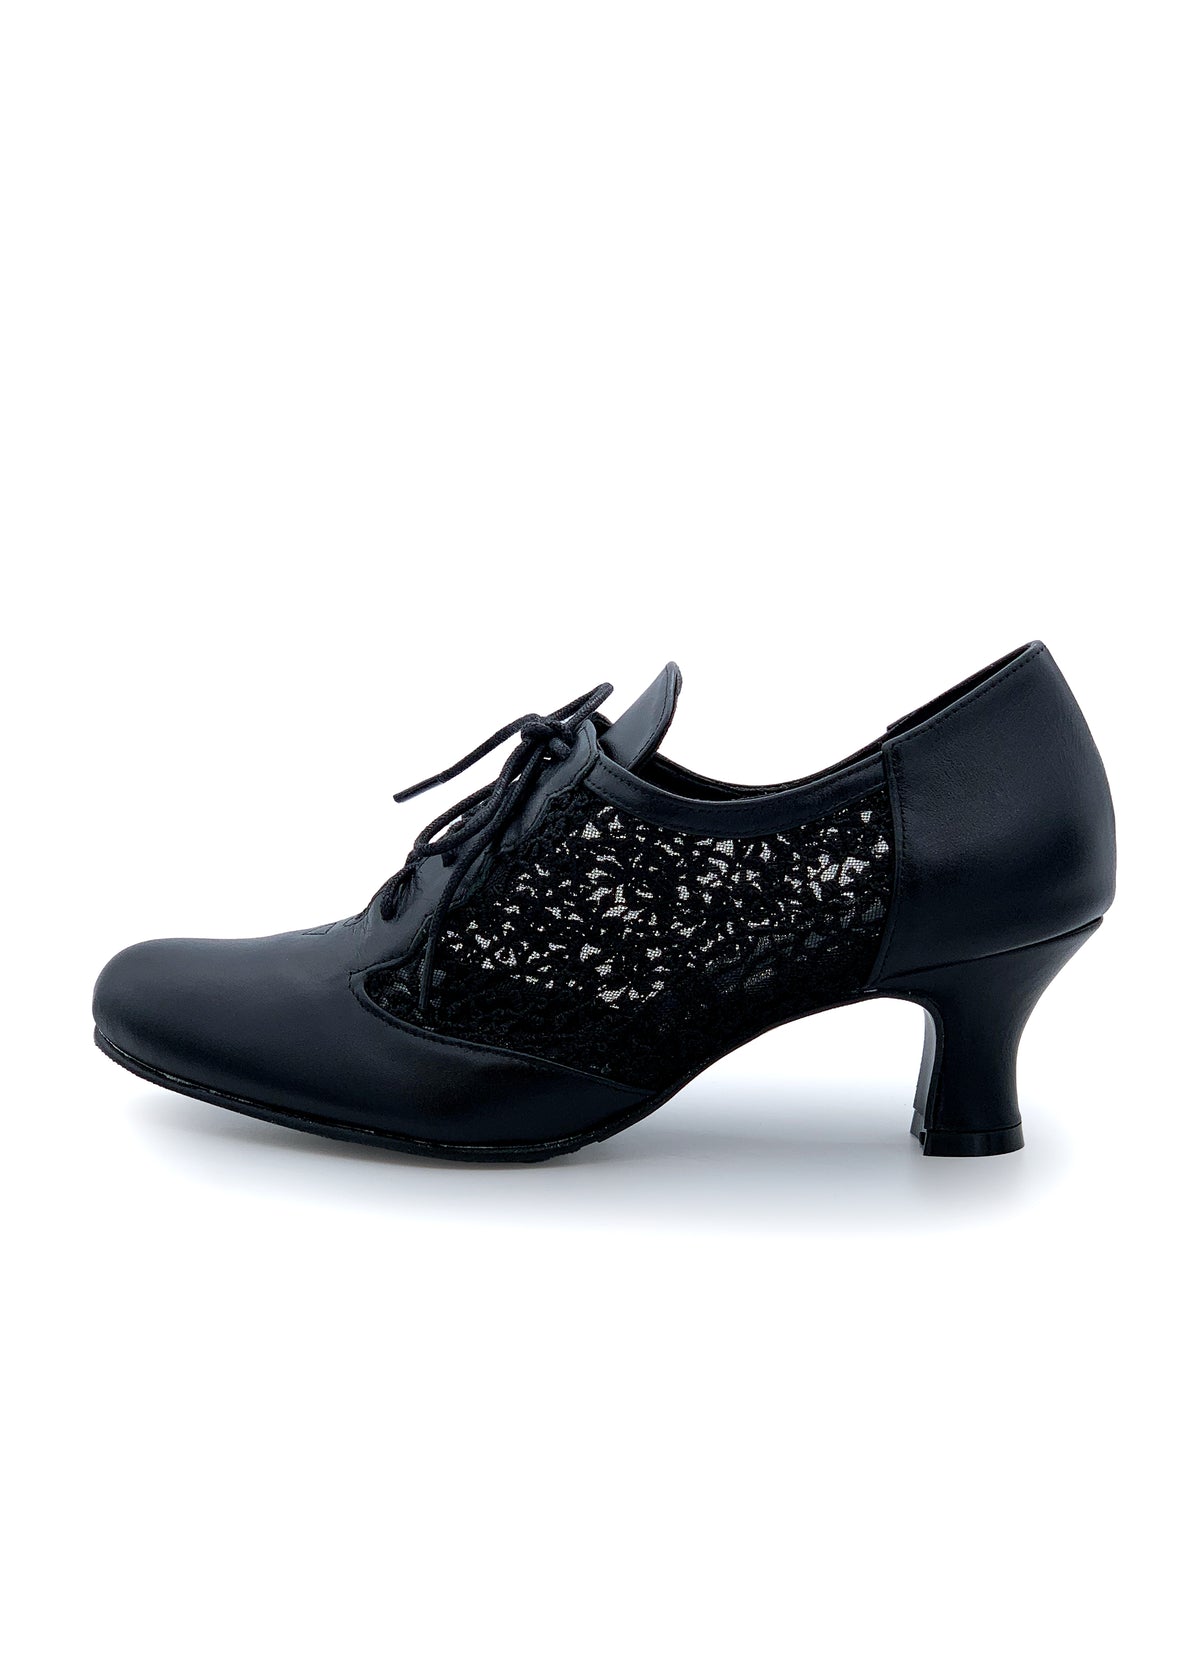 Party Walking shoes with a low heel - black leather, lace sides